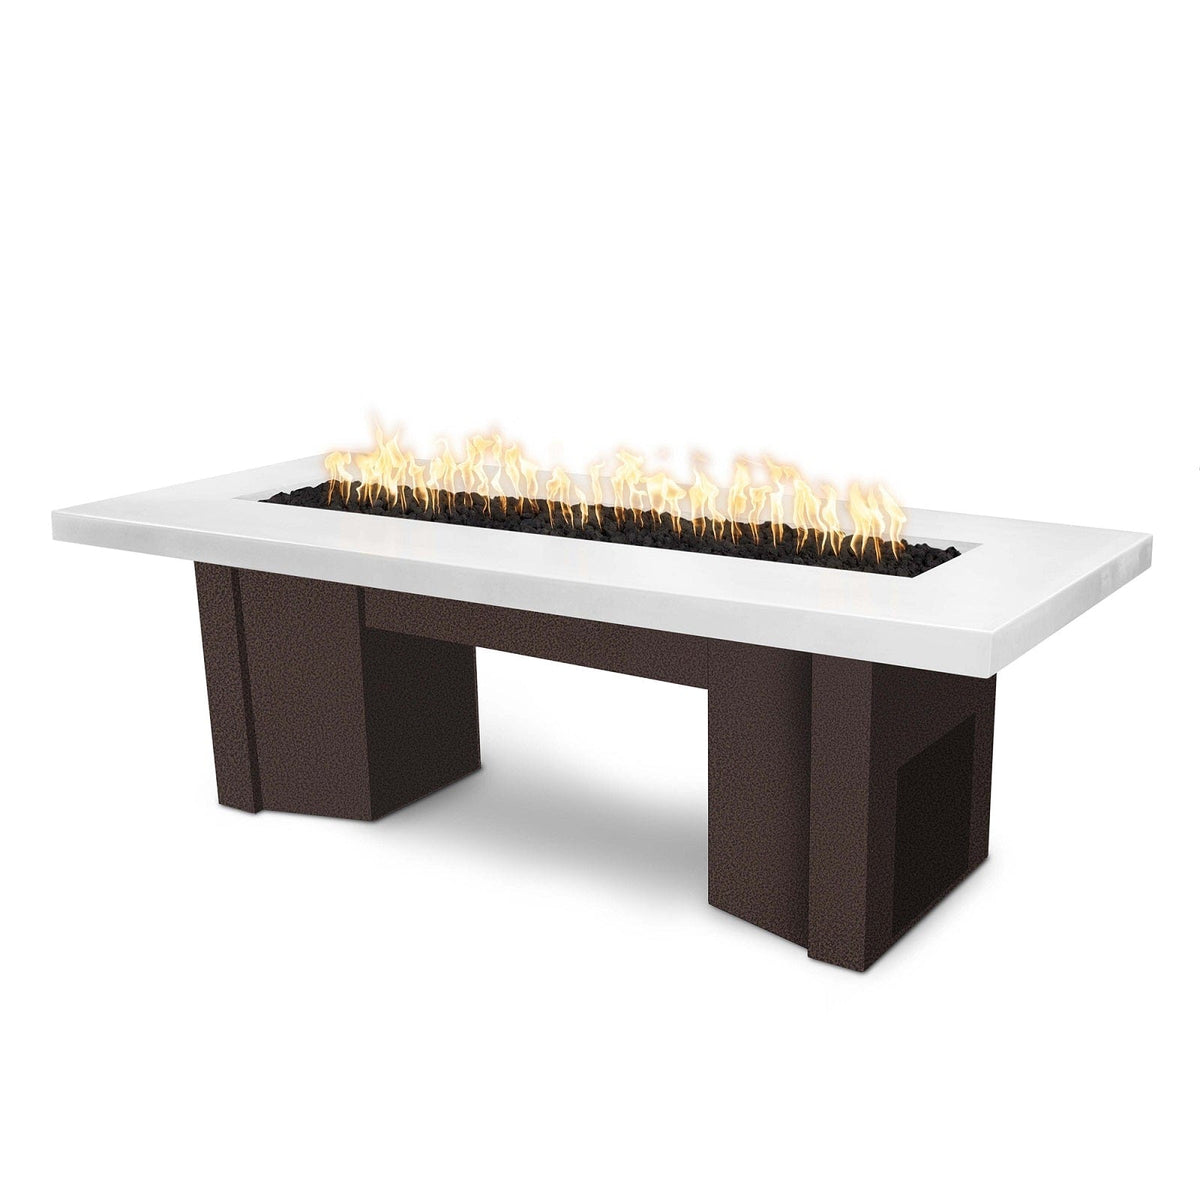 The Outdoor Plus Fire Features Limestone (-LIM) / Copper Vein Powder Coated Steel (-CPV) The Outdoor Plus 78&quot; Alameda Fire Table Smooth Concrete in Natural Gas - Flame Sense System with Push Button Spark Igniter / OPT-ALMGFRC78FSEN-NG